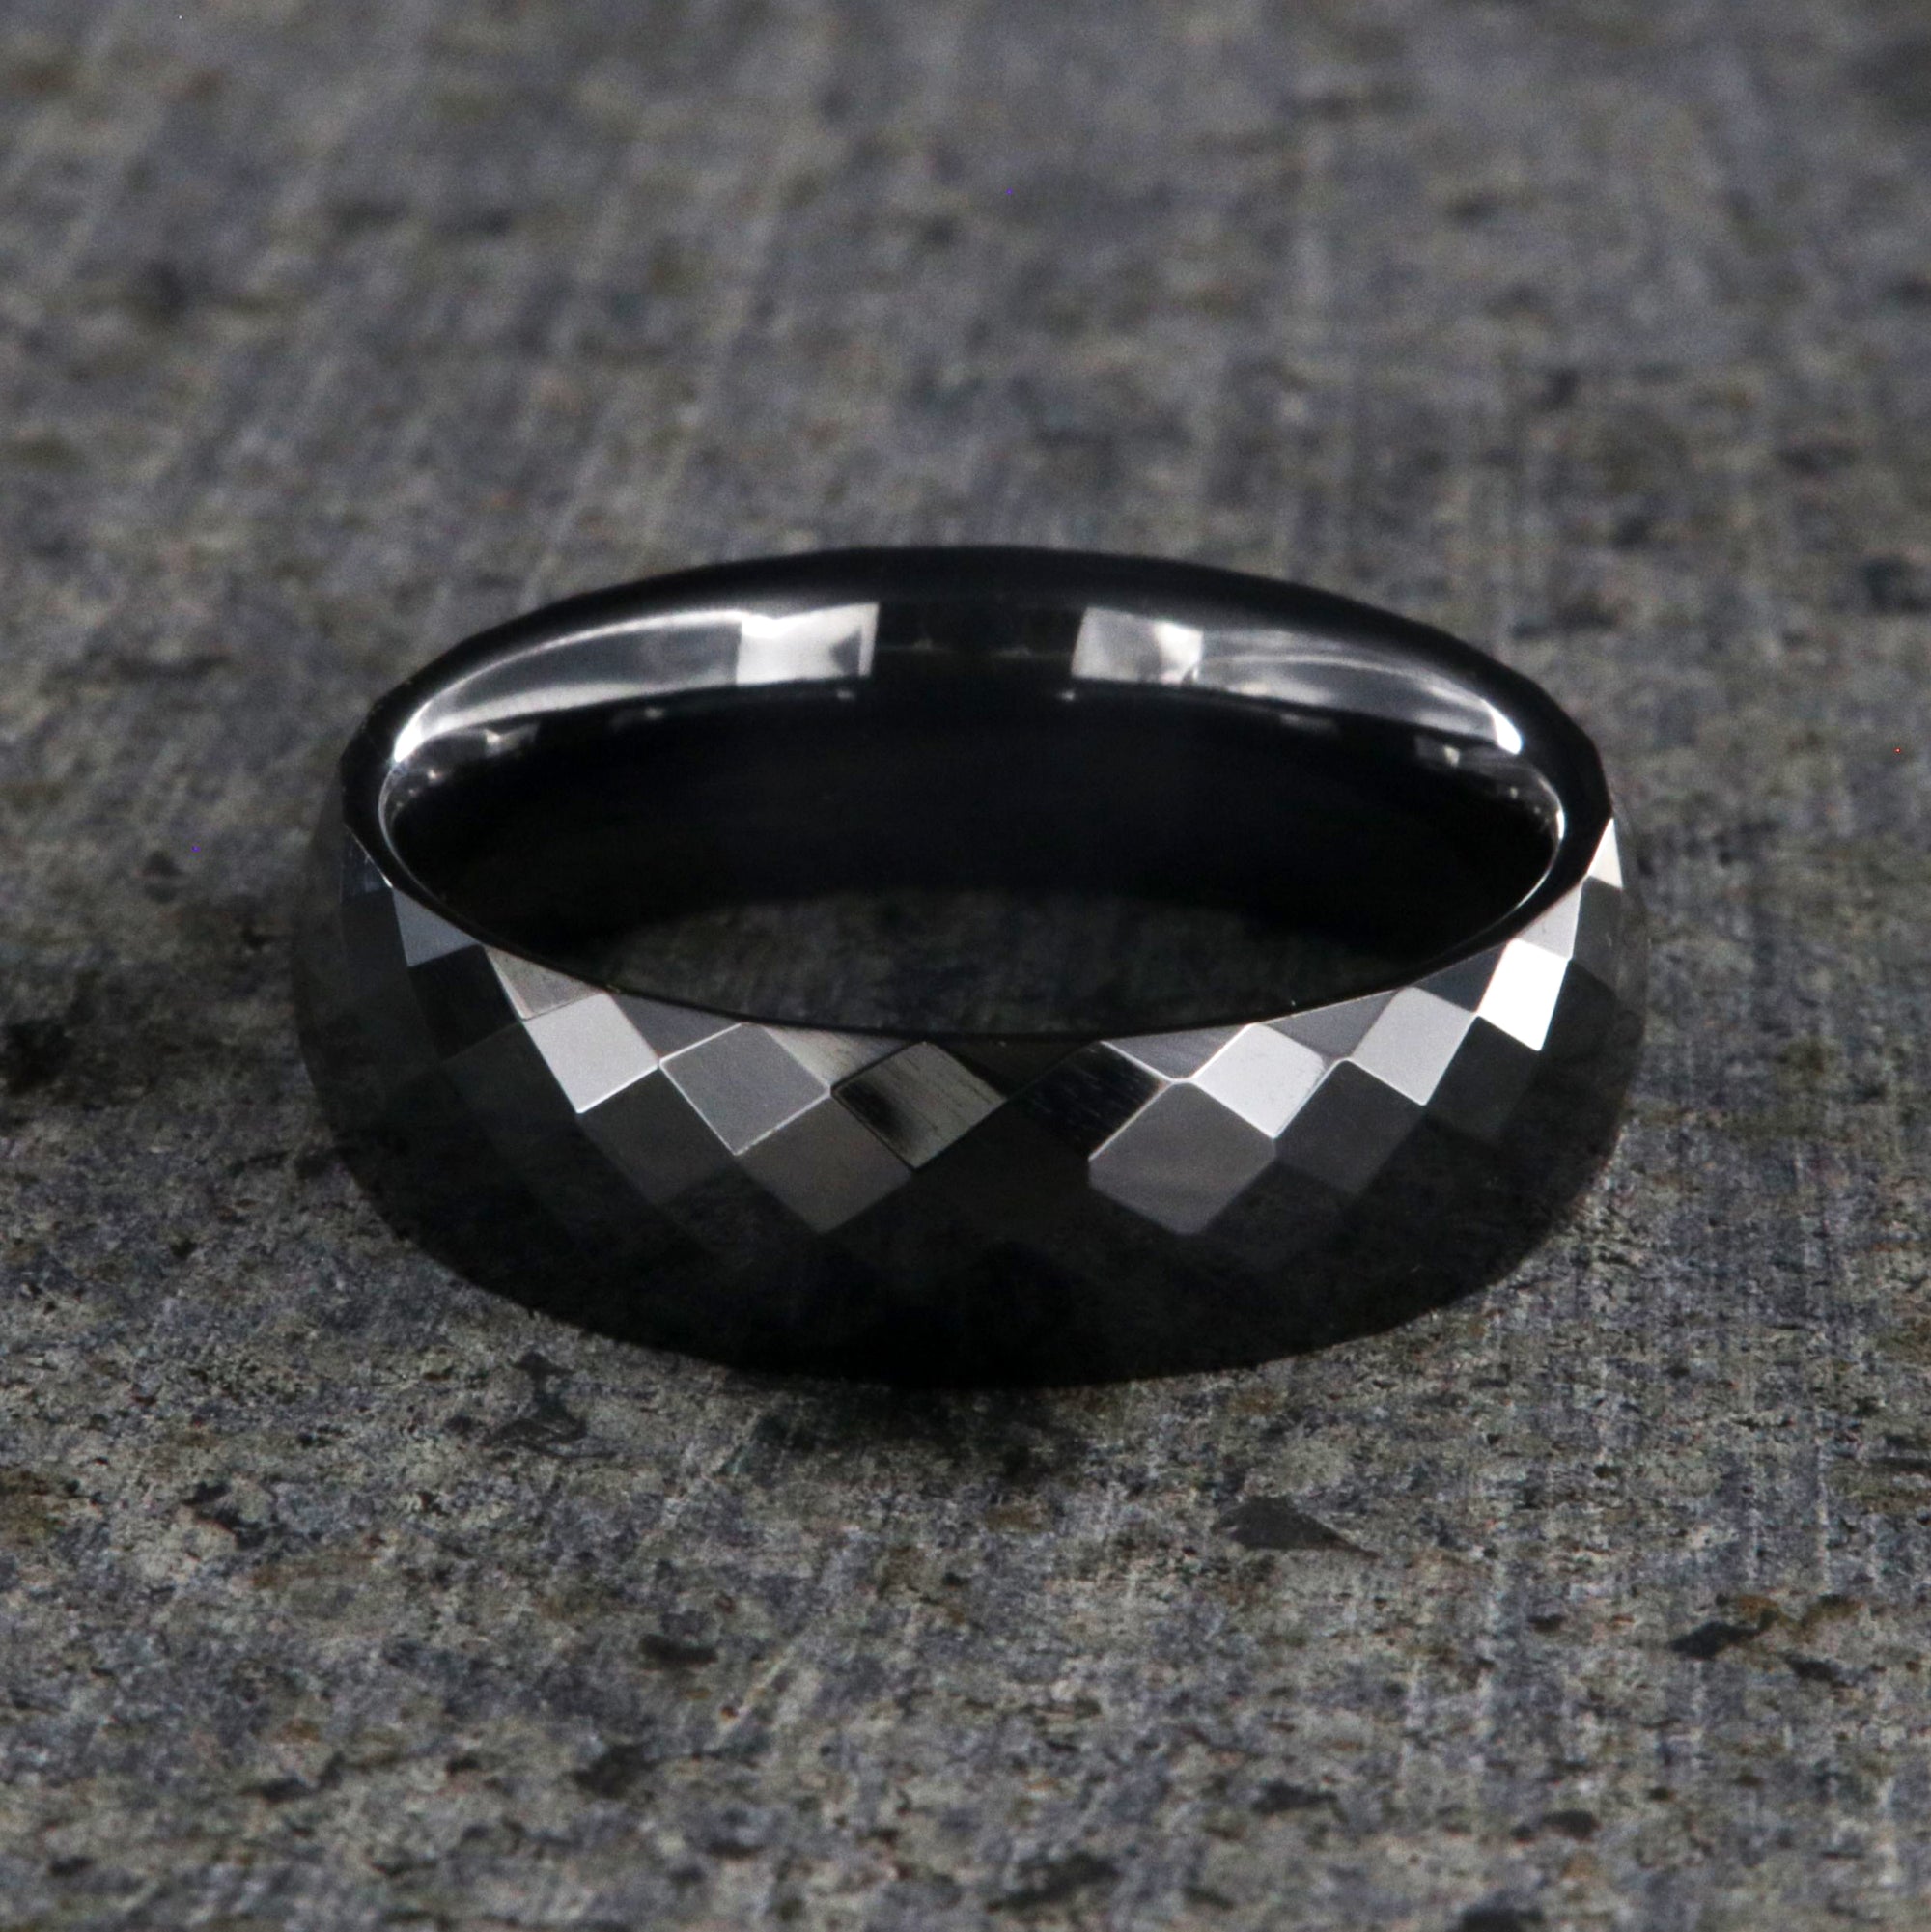 6mm wide black ceramic ring with a diamond texture and polished finish